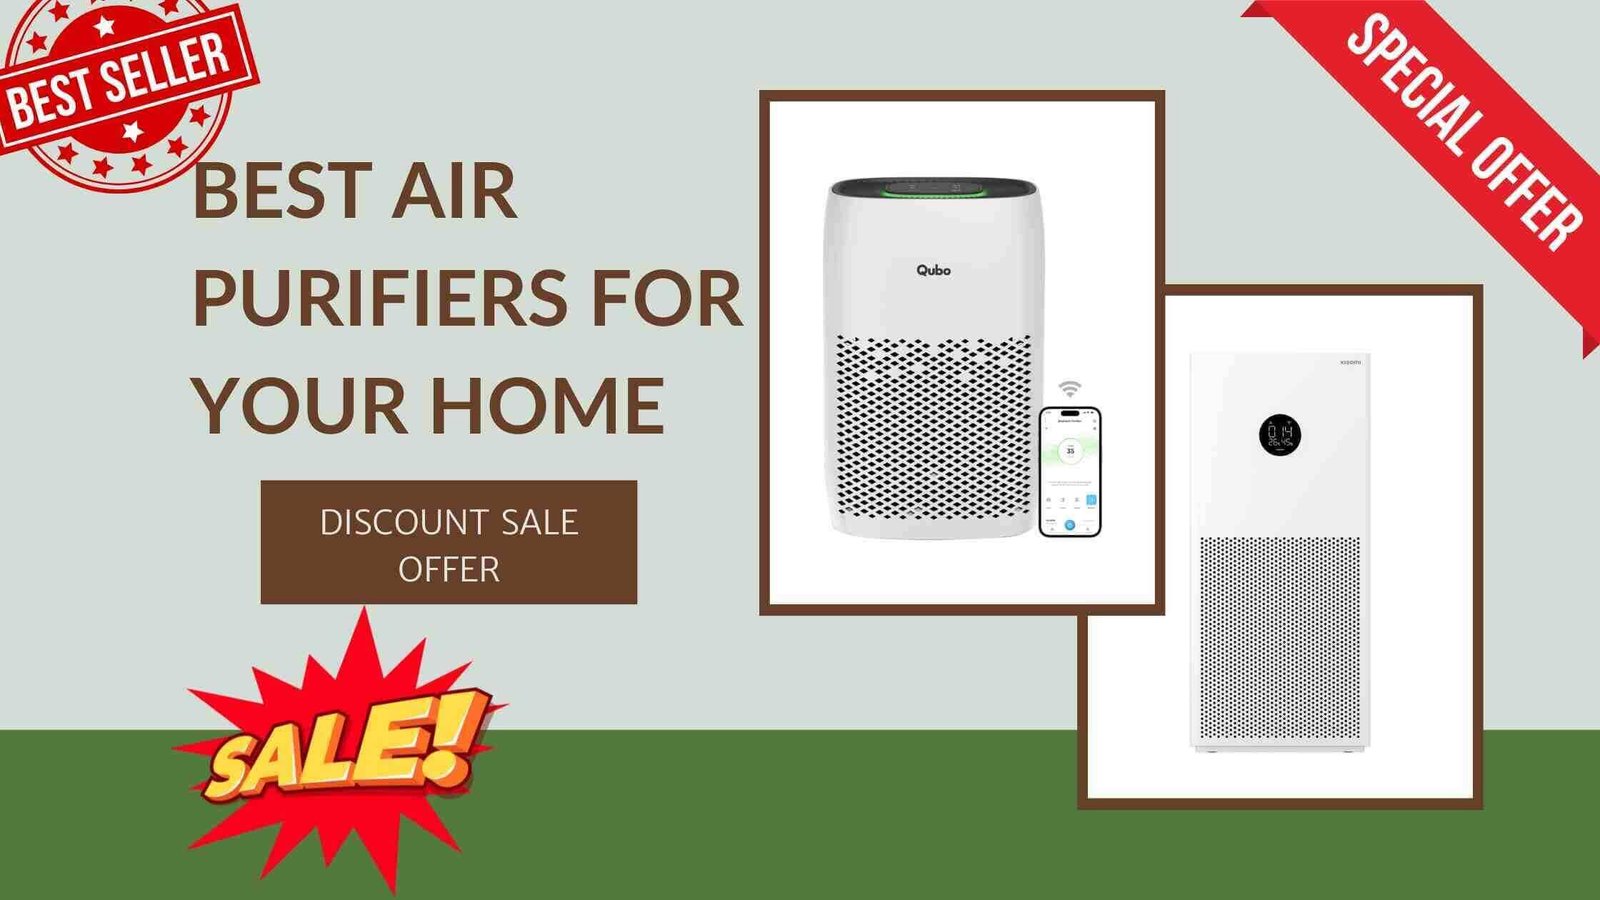 Best Air Purifiers for Your Home